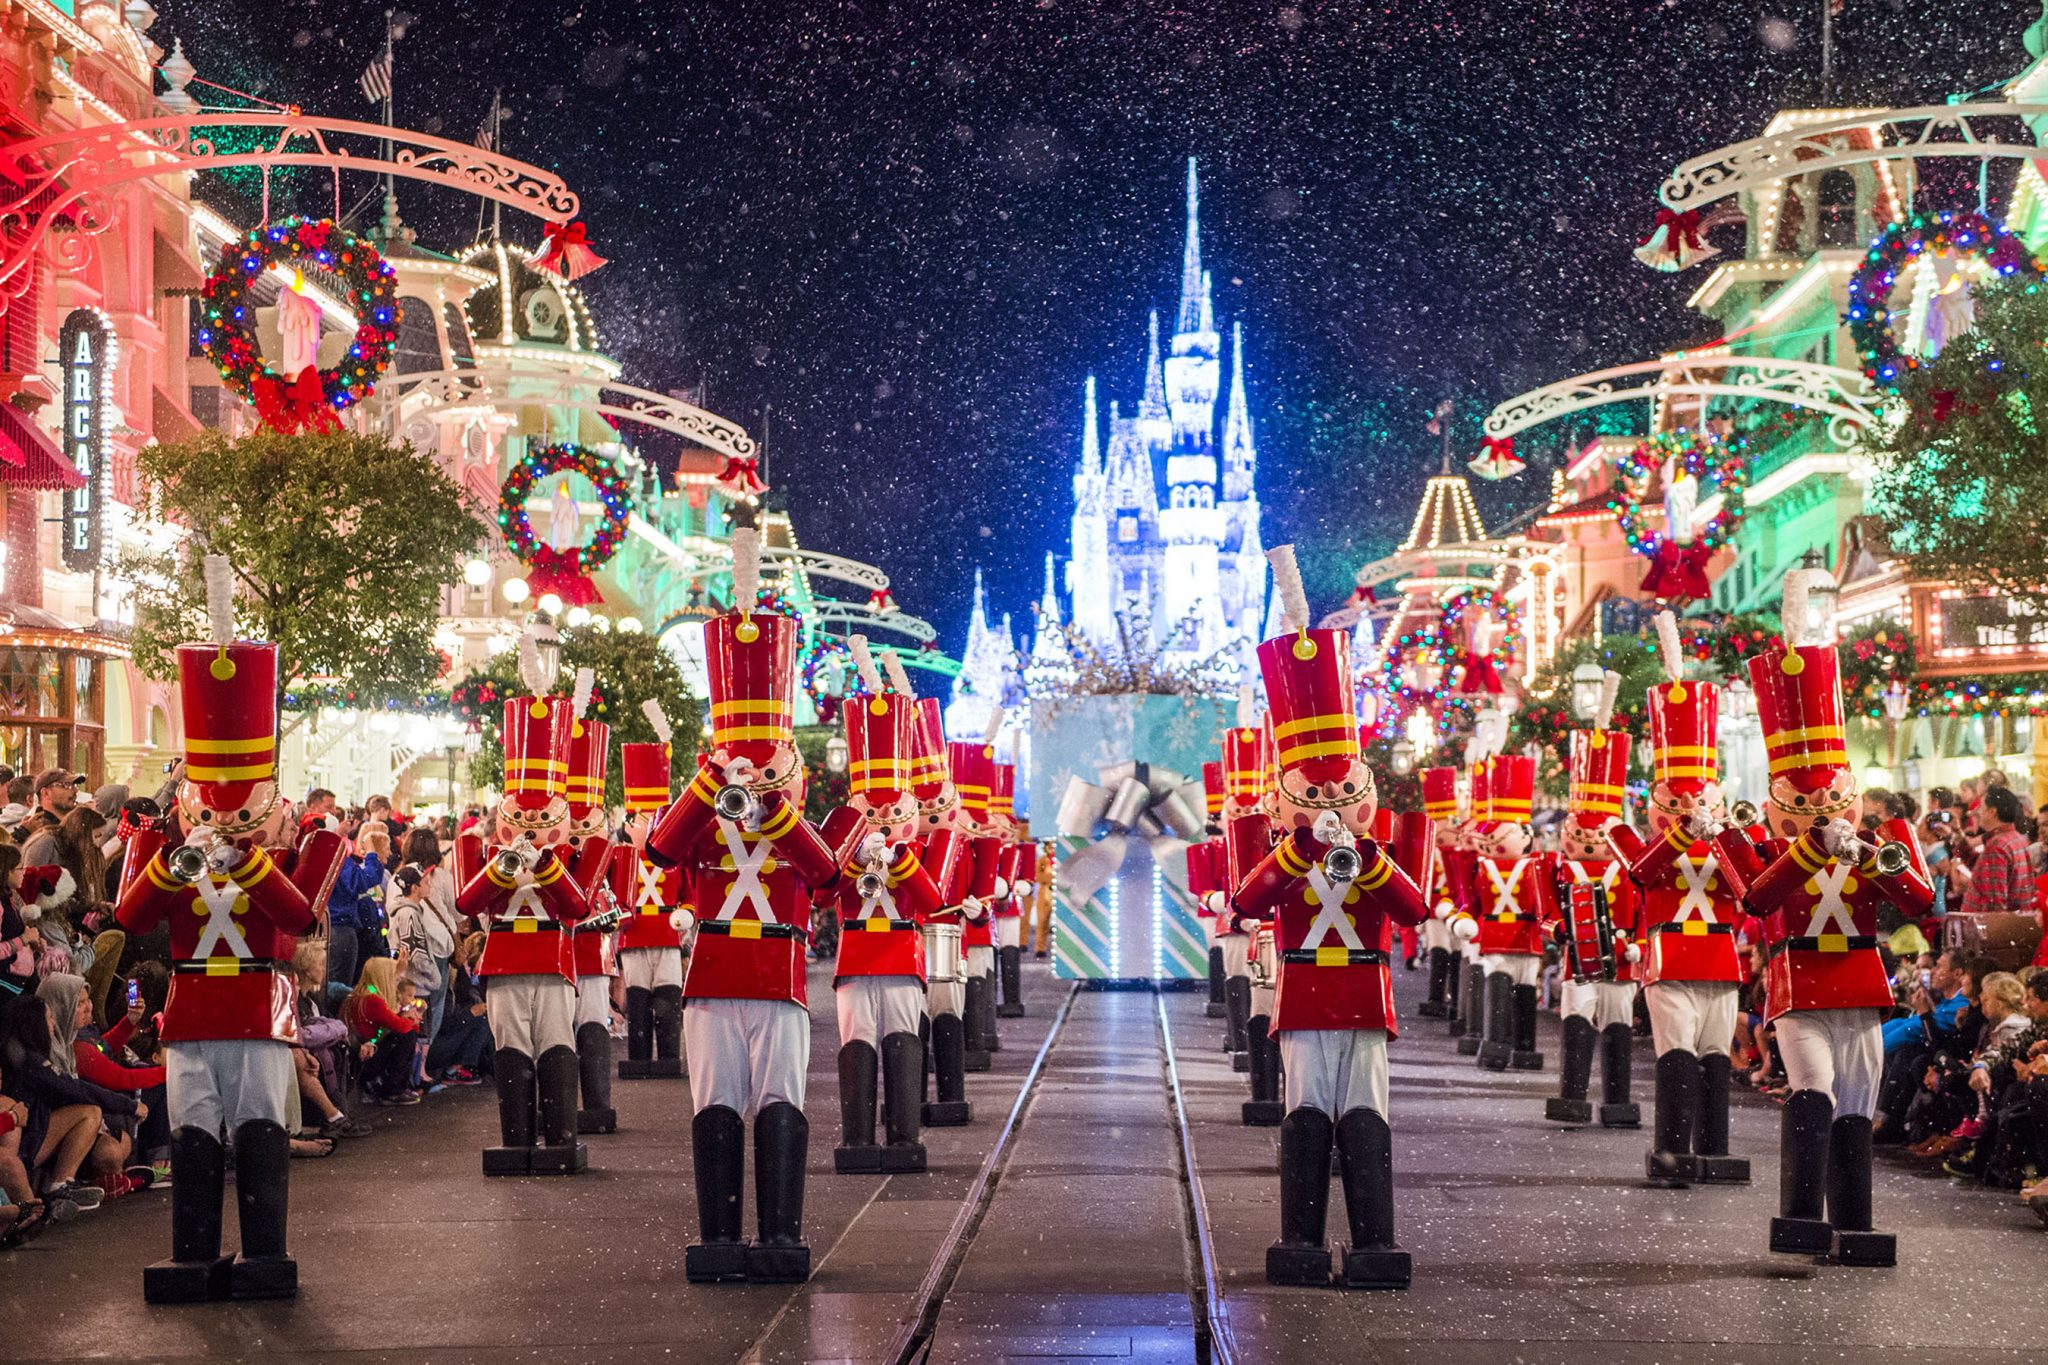 ResortLoop.com Episode 174 – Top 5 Must Do’s During Christmas At WDW